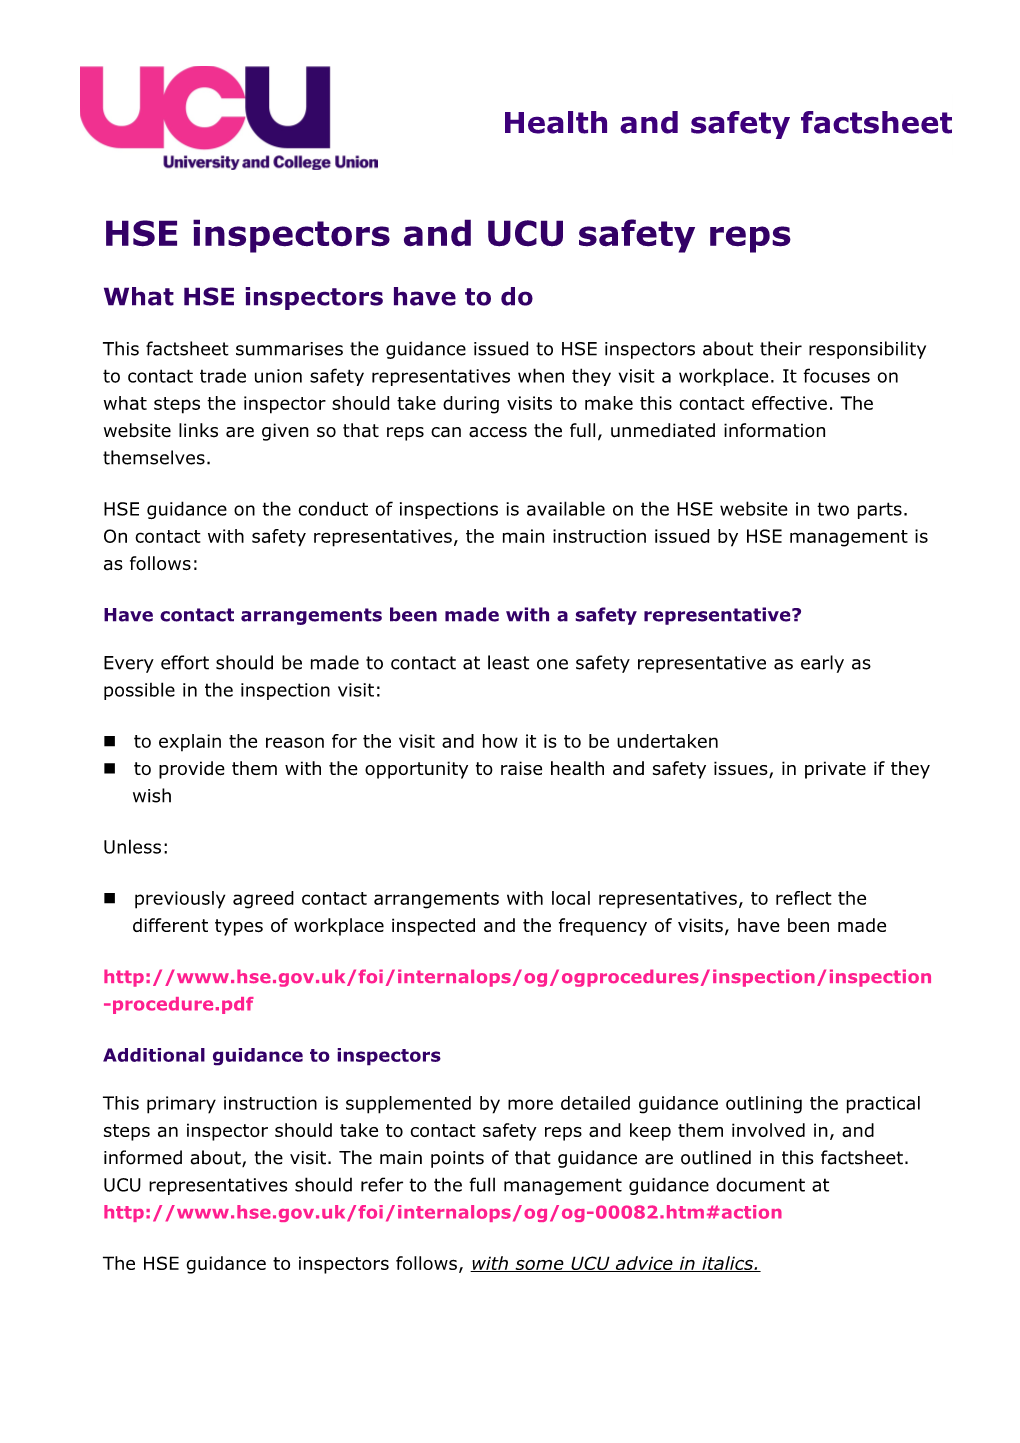 HSE Inspectors and UCU Safety Reps